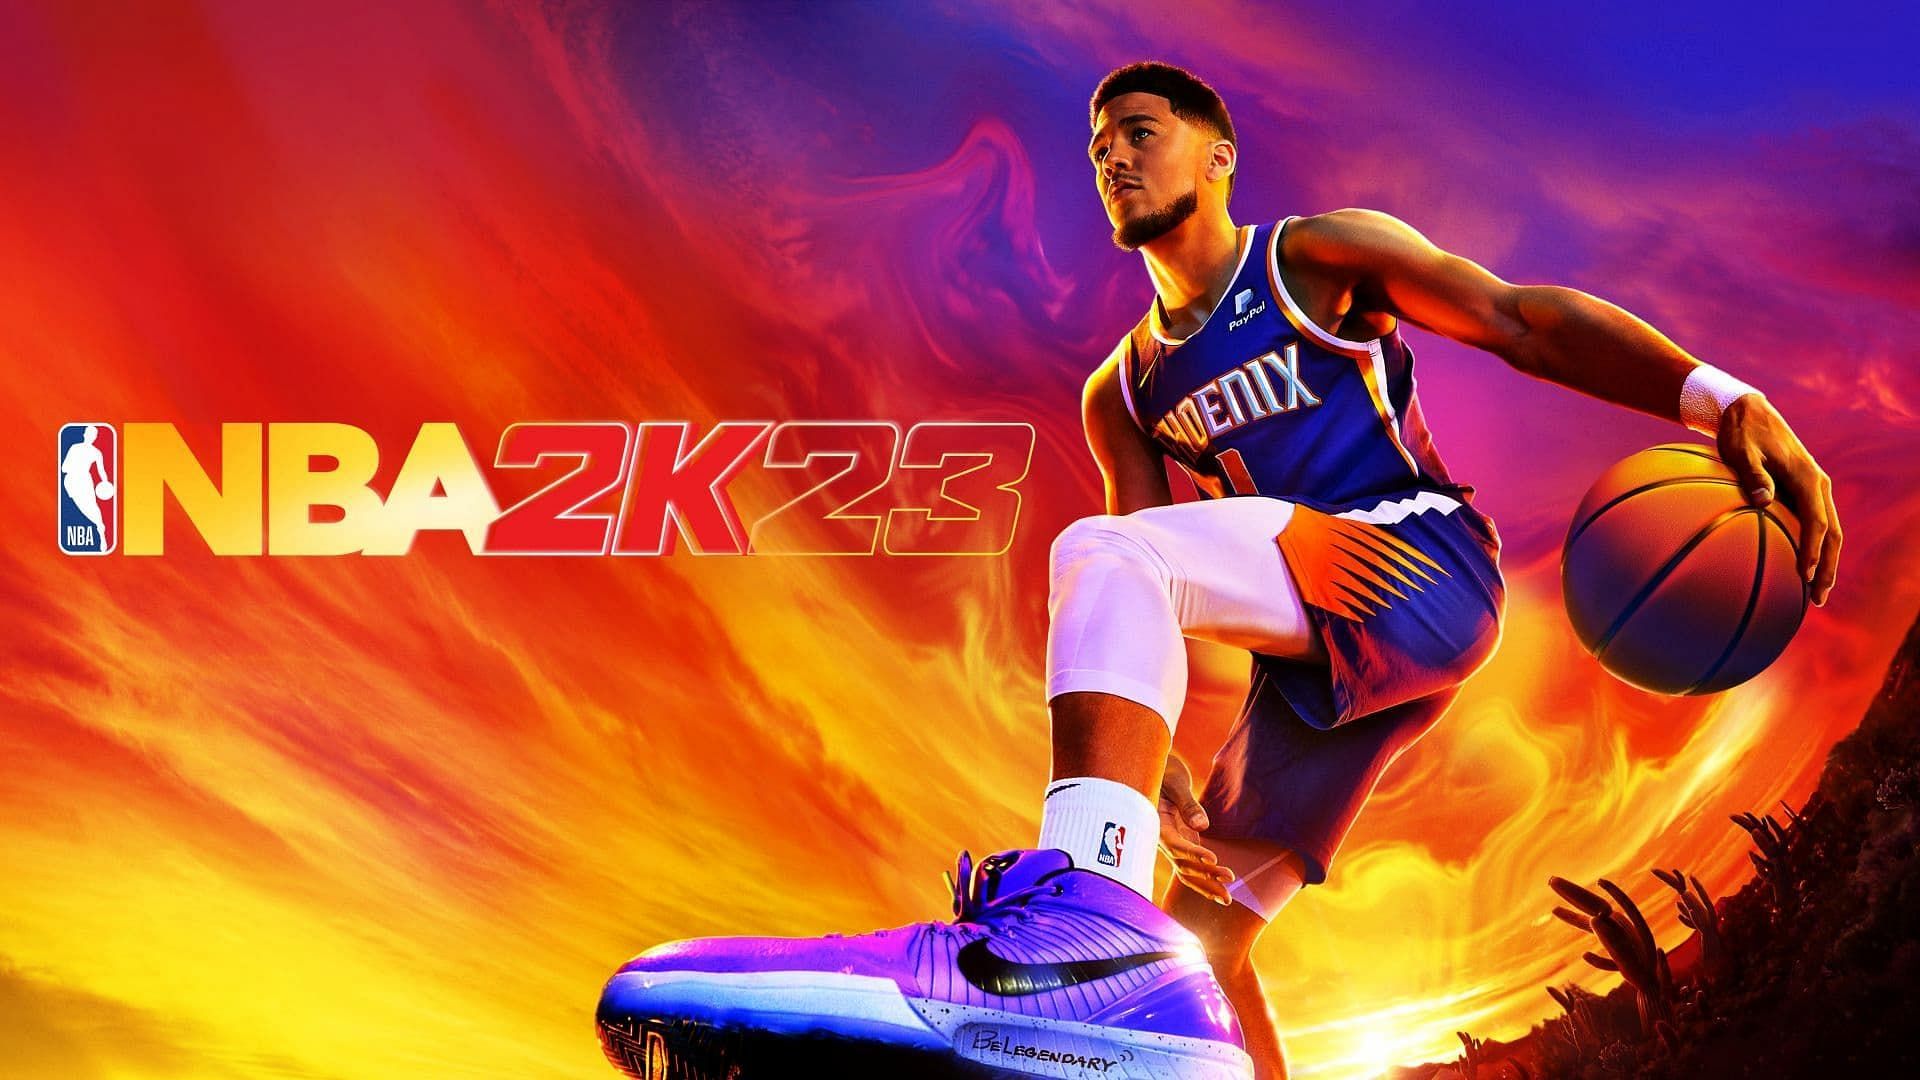 NBA 2k23 can be run with 4 GB RAM on low settings (Image via 2k Games)